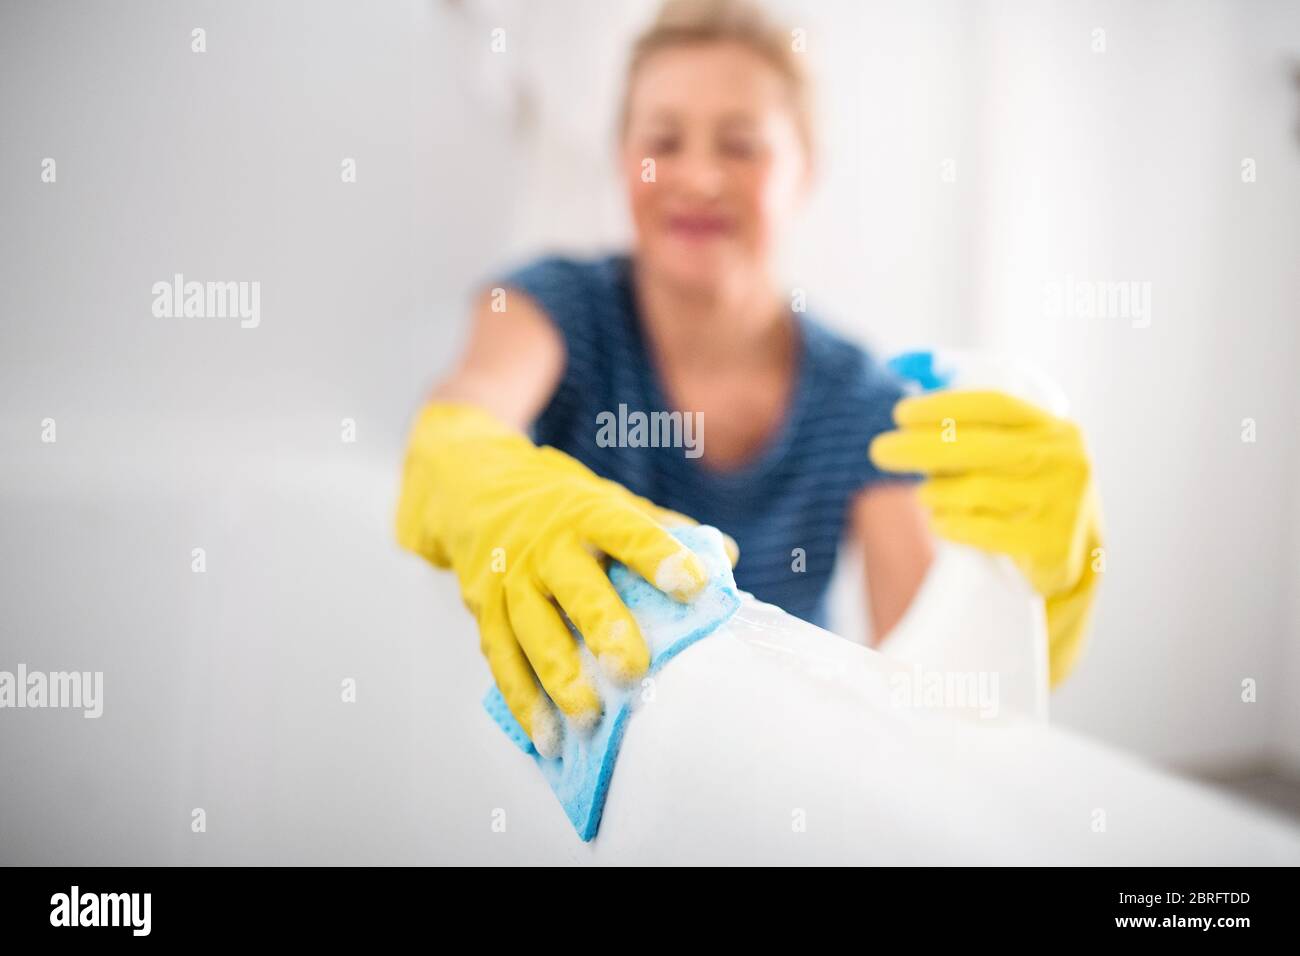 Senior woman with gloves cleaning bathroom indoors at home. Stock Photo